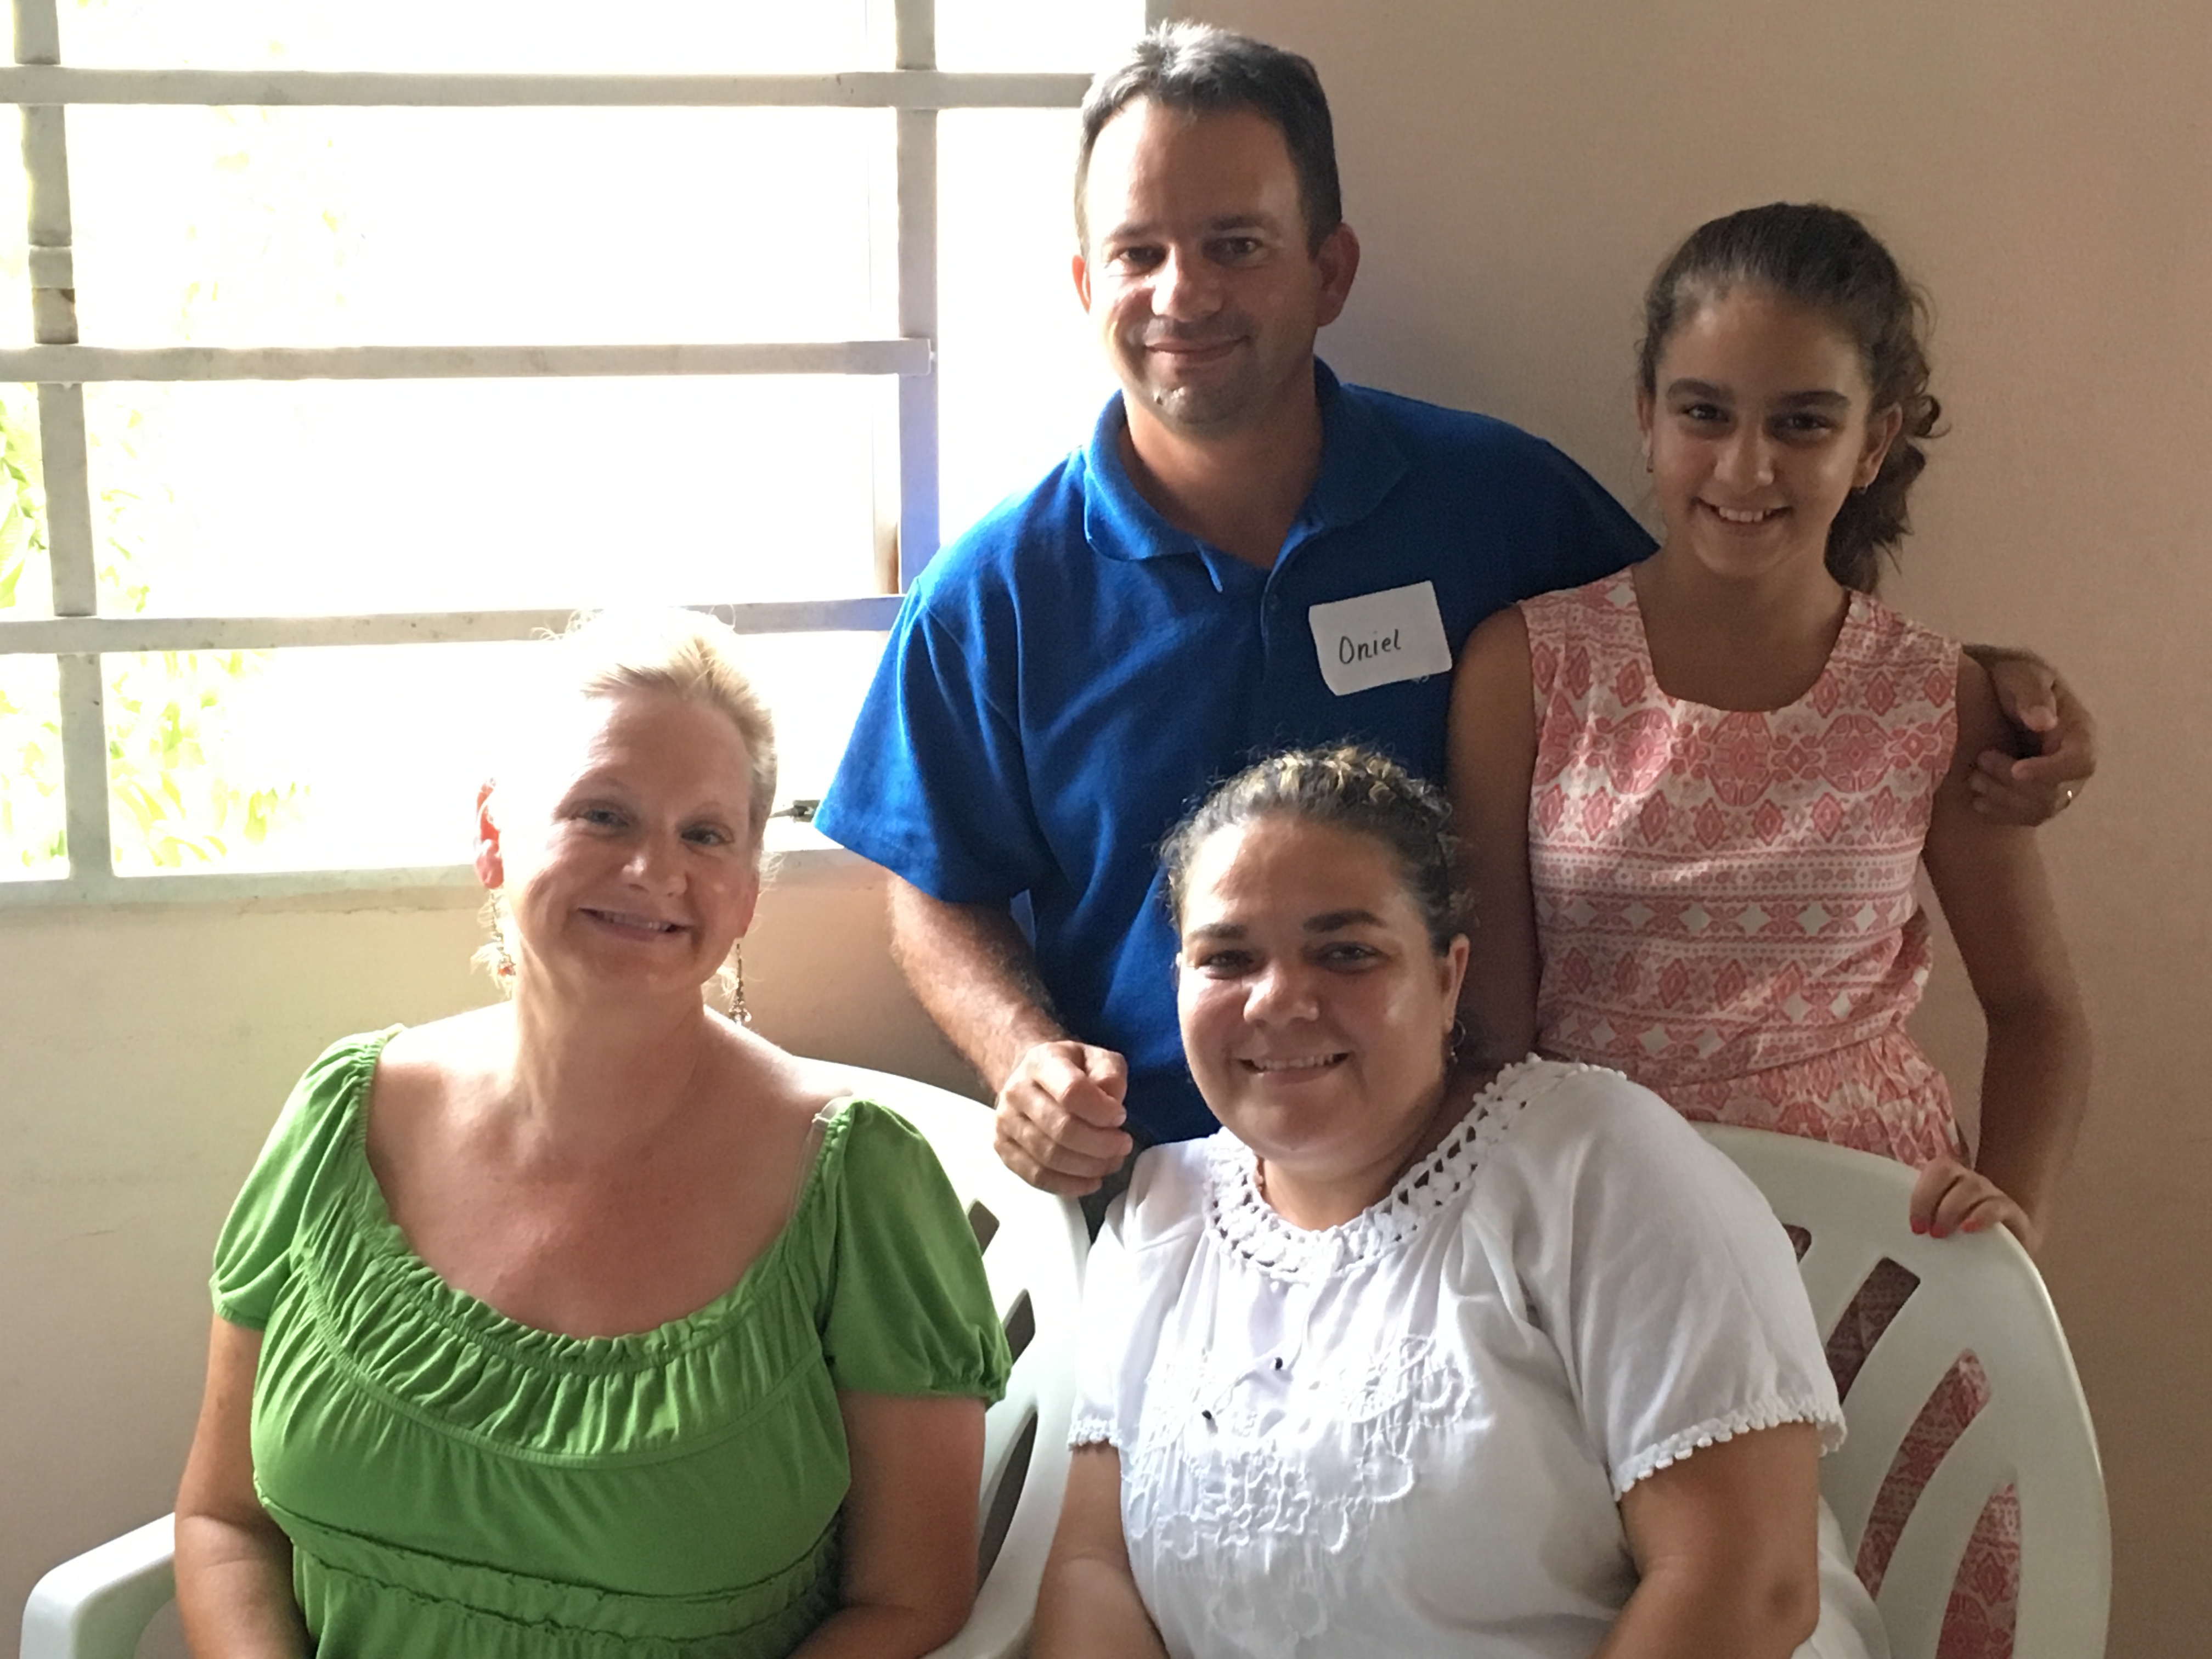 Dawn with Pastor Oniel and his wife, Heidy and daughter, Rosa